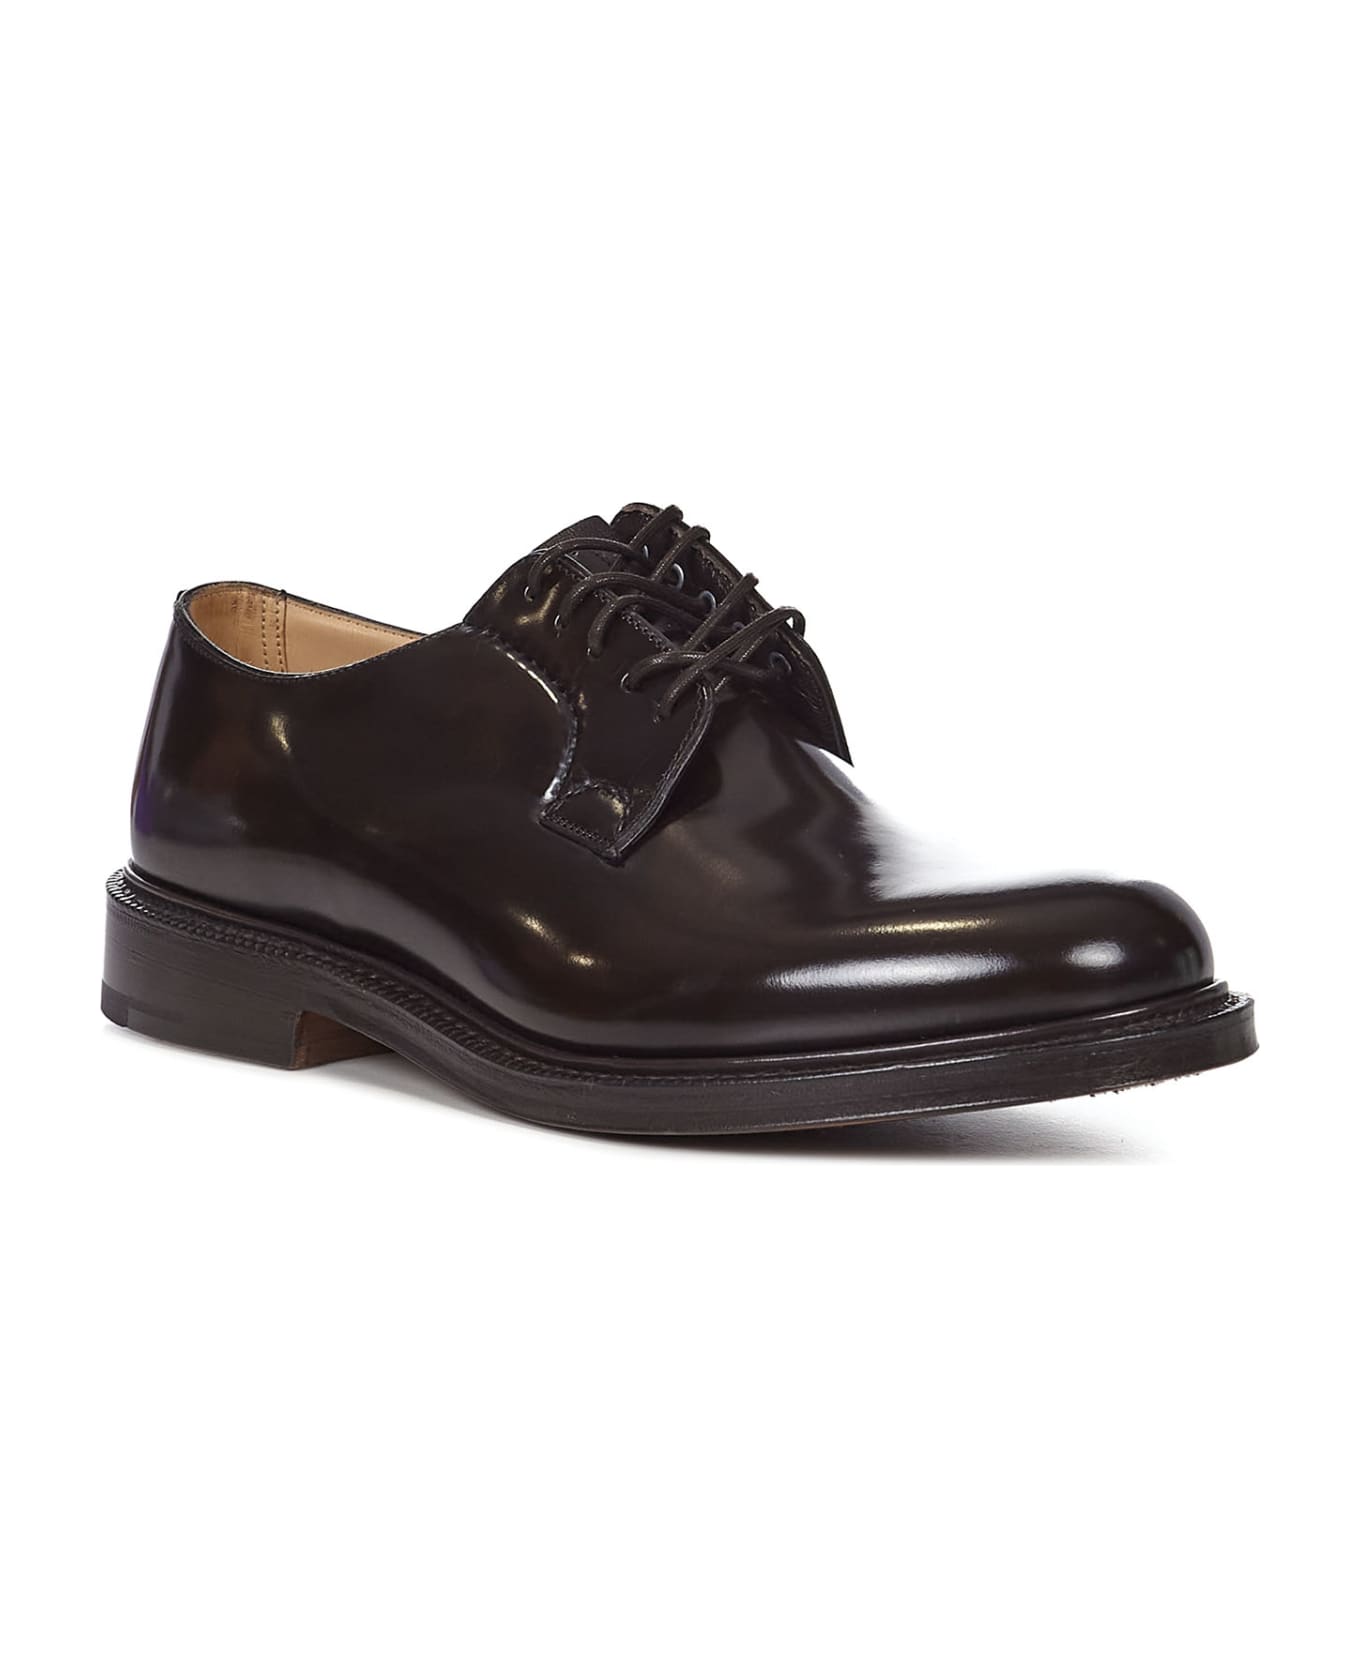 Church's Derby Shoes - Brown